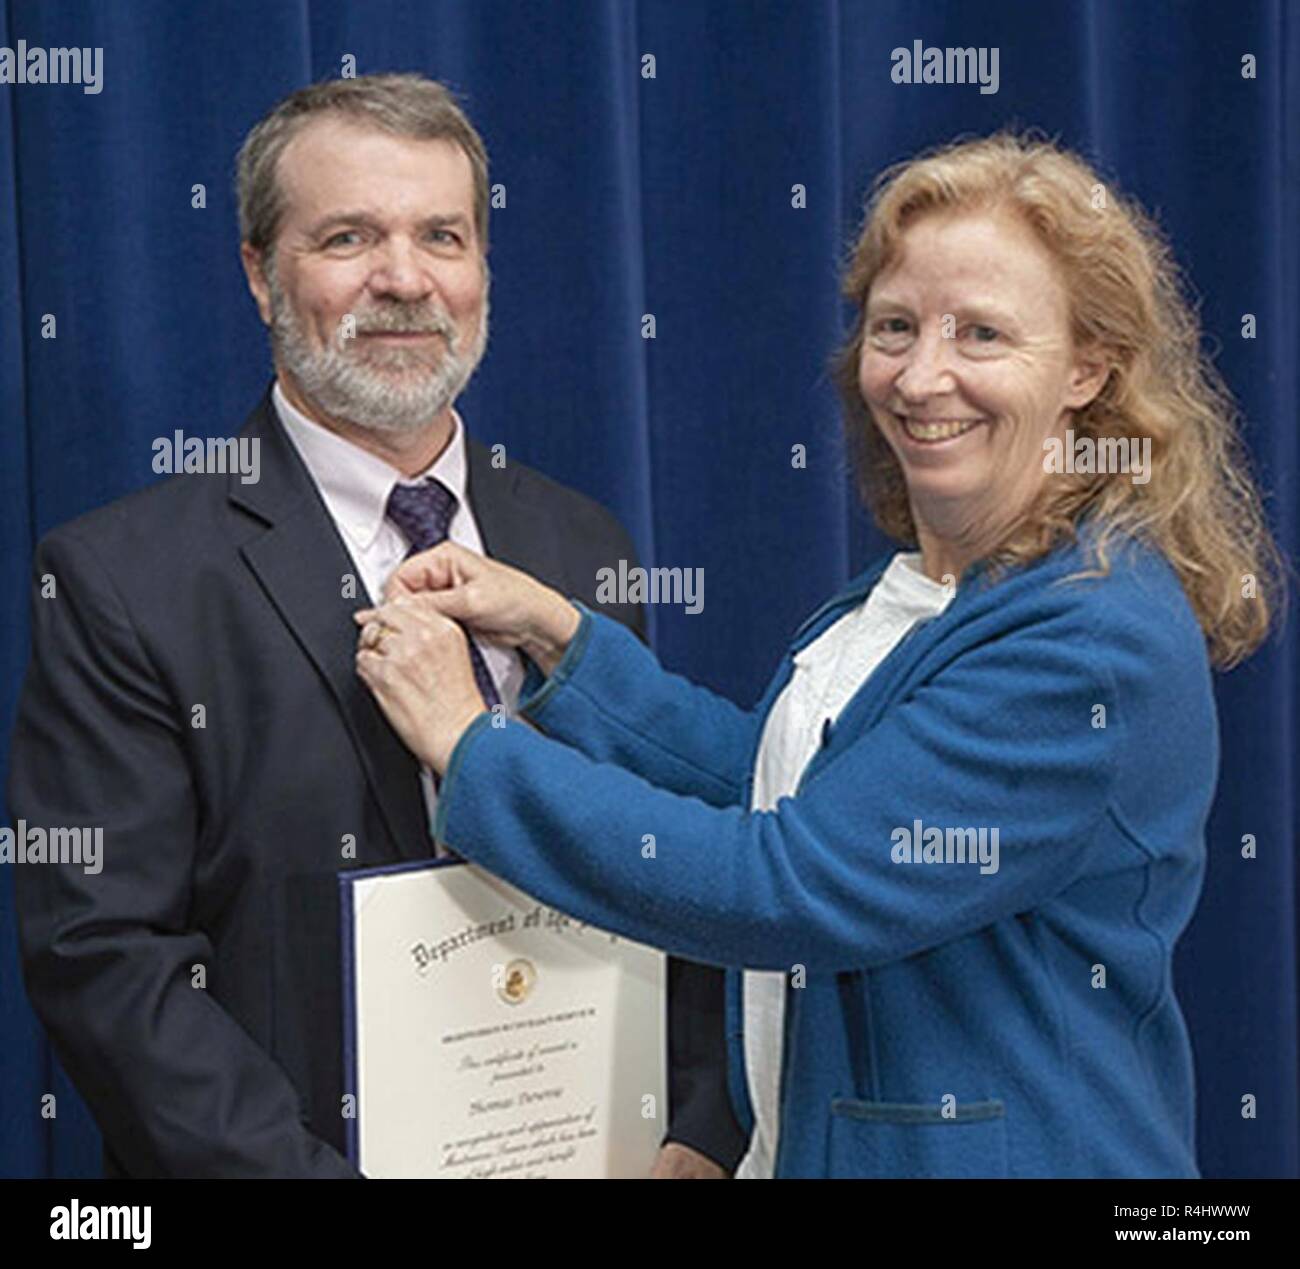 Thomas Downie (left photo) has his medal pinned by his wife, Deborah, after receiving his Department of the Navy Meritorious Civilian Service Award during an Oct. 1 awards ceremony. Stock Photo